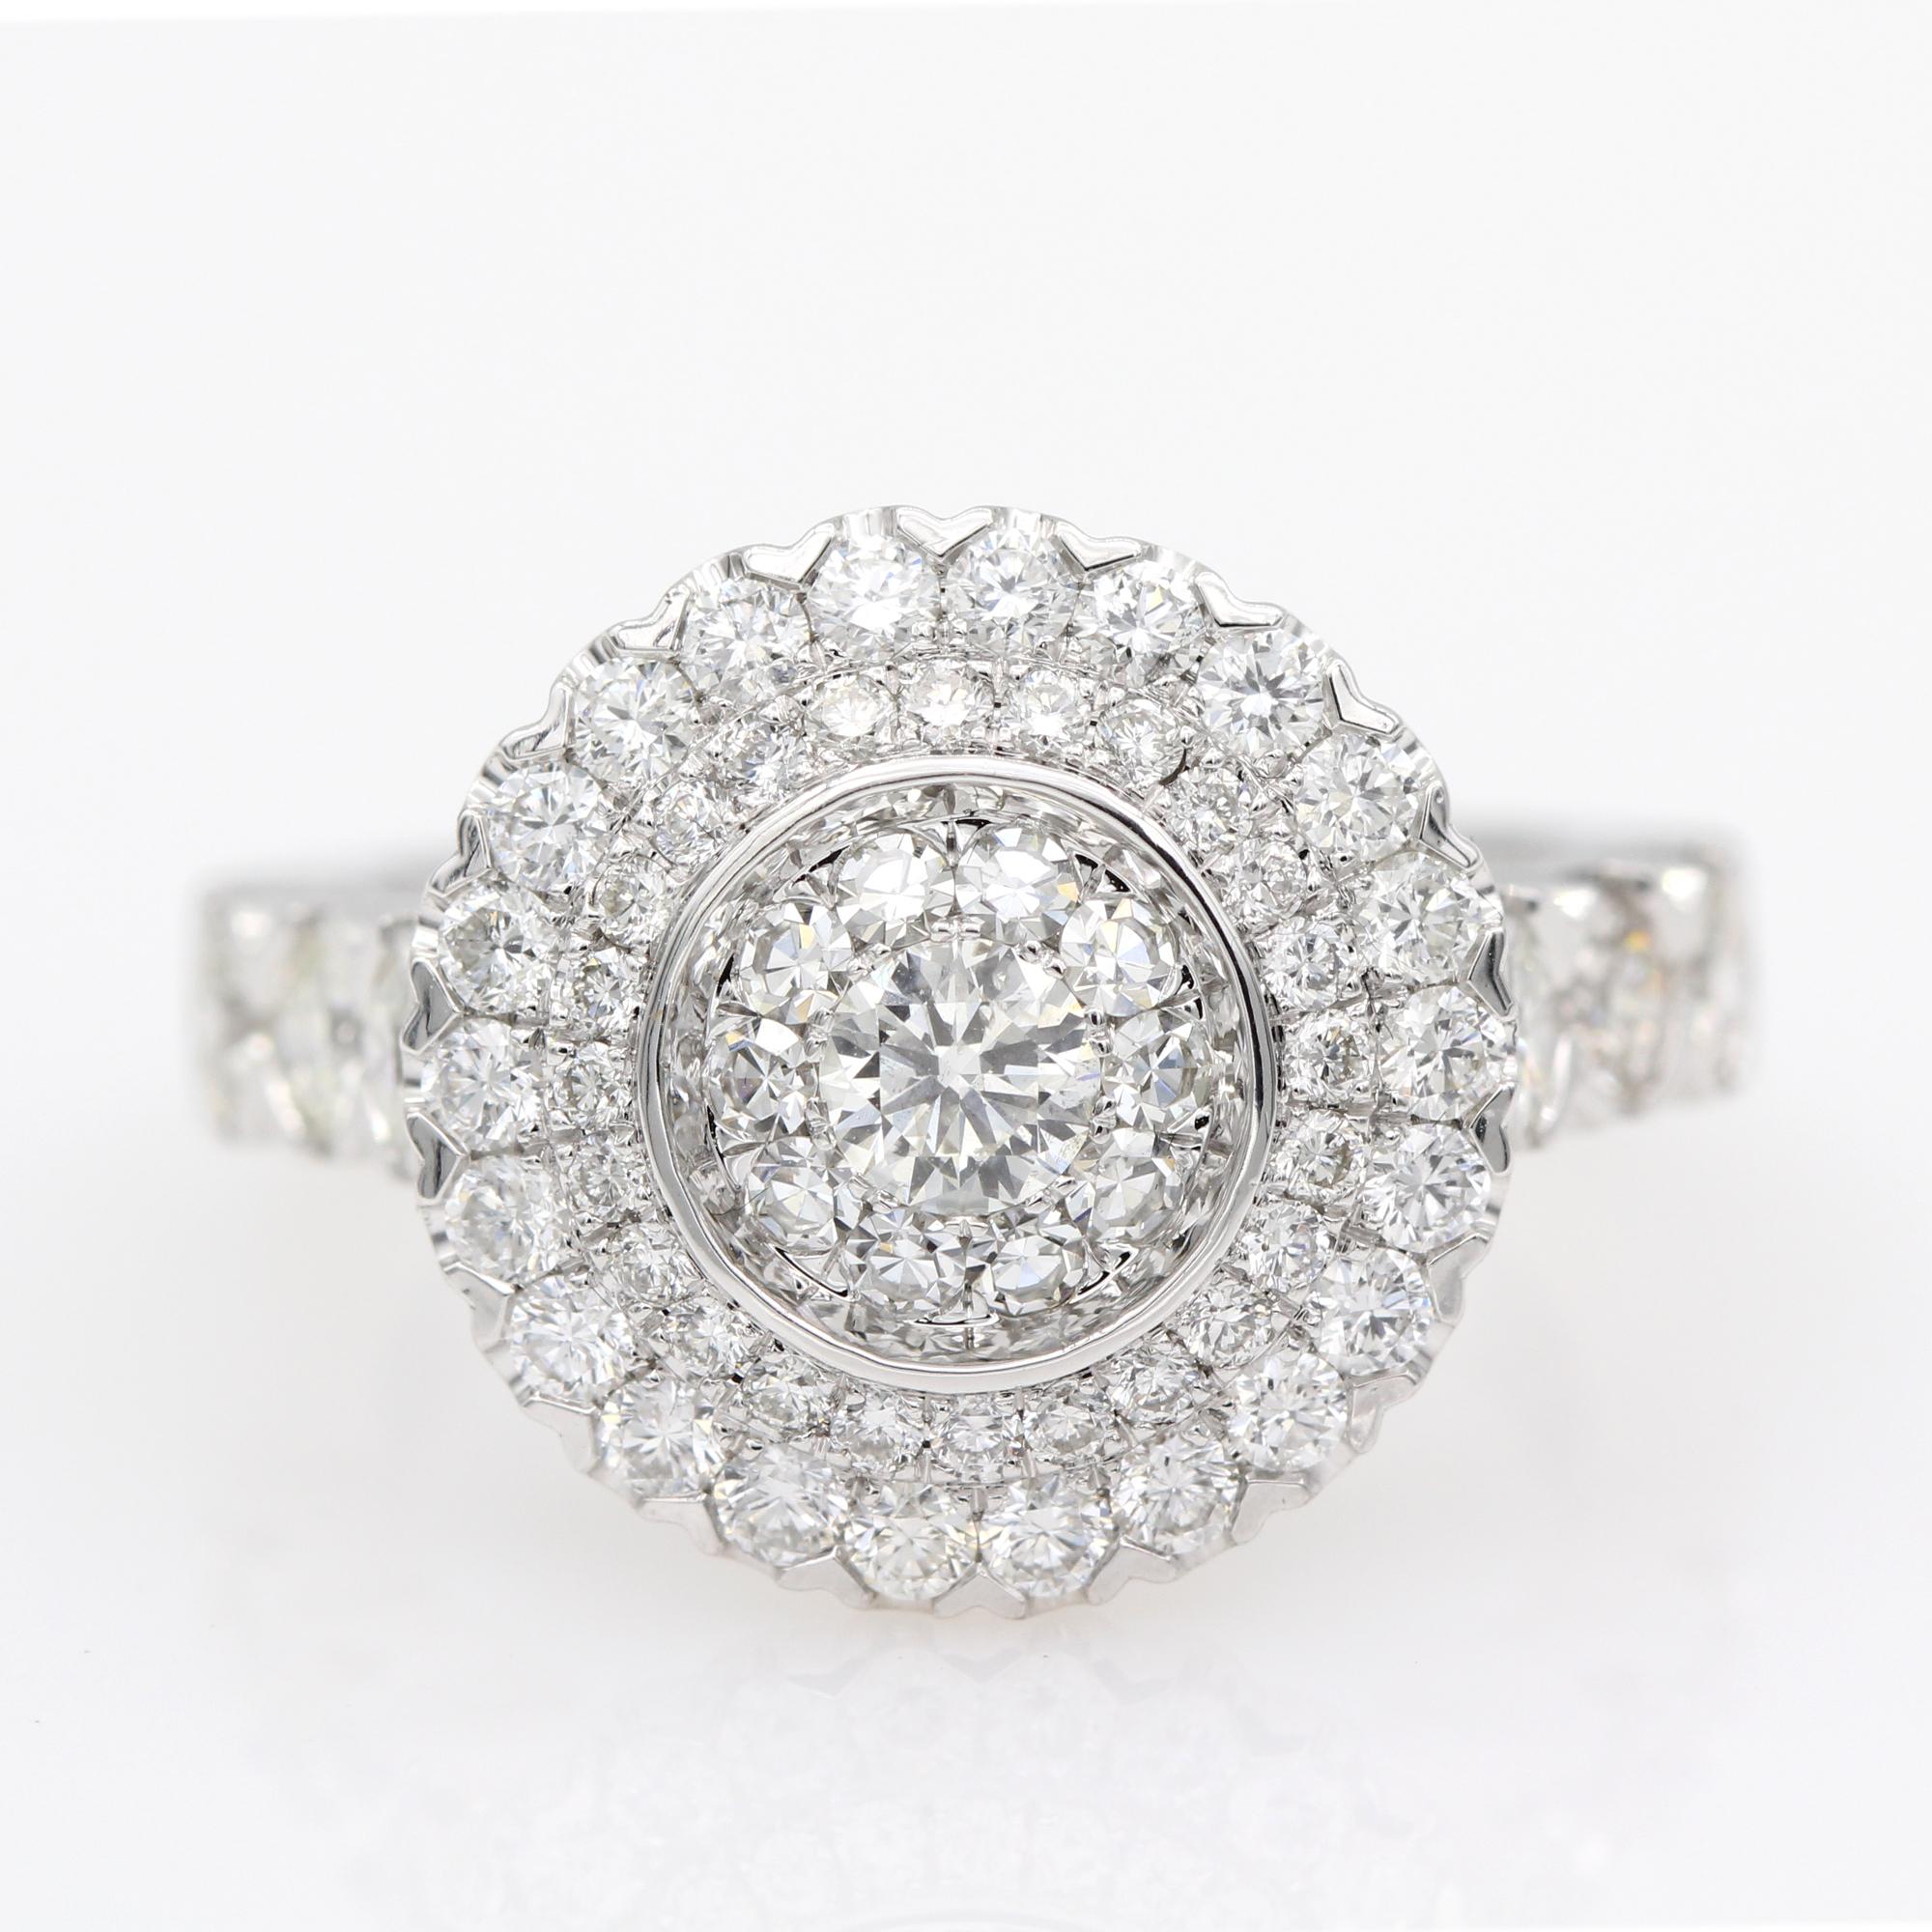 Super Cluster Layout of Brilliant Diamonds, This special craftsmanship makes the diamonds visible to the eye as one large diamond, must see it to believe it ! Diamond area diameter size approx 20 mm,  or 5/8 of a inch.  18k white gold 9.75